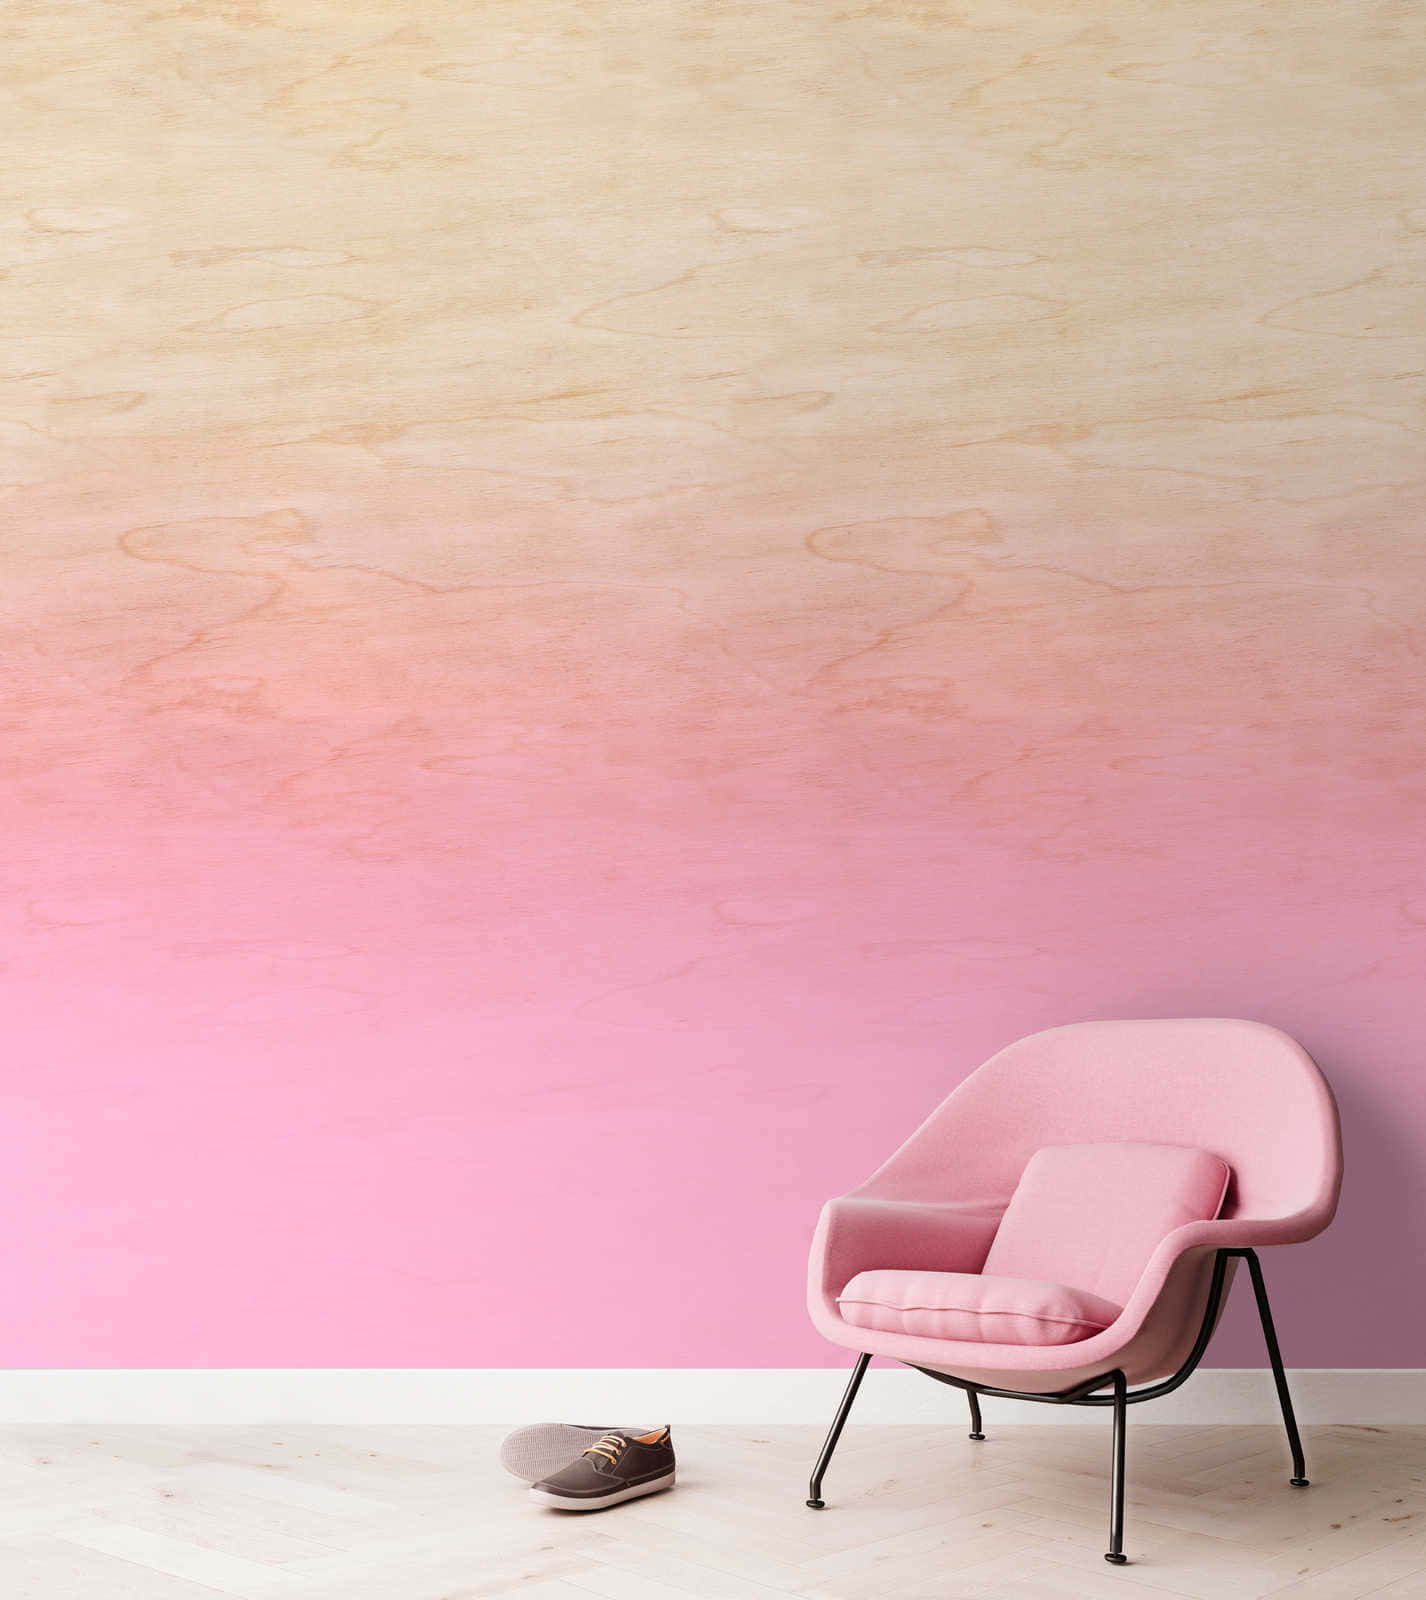 Pink Ombre Wallwith Chairand Shoe Wallpaper